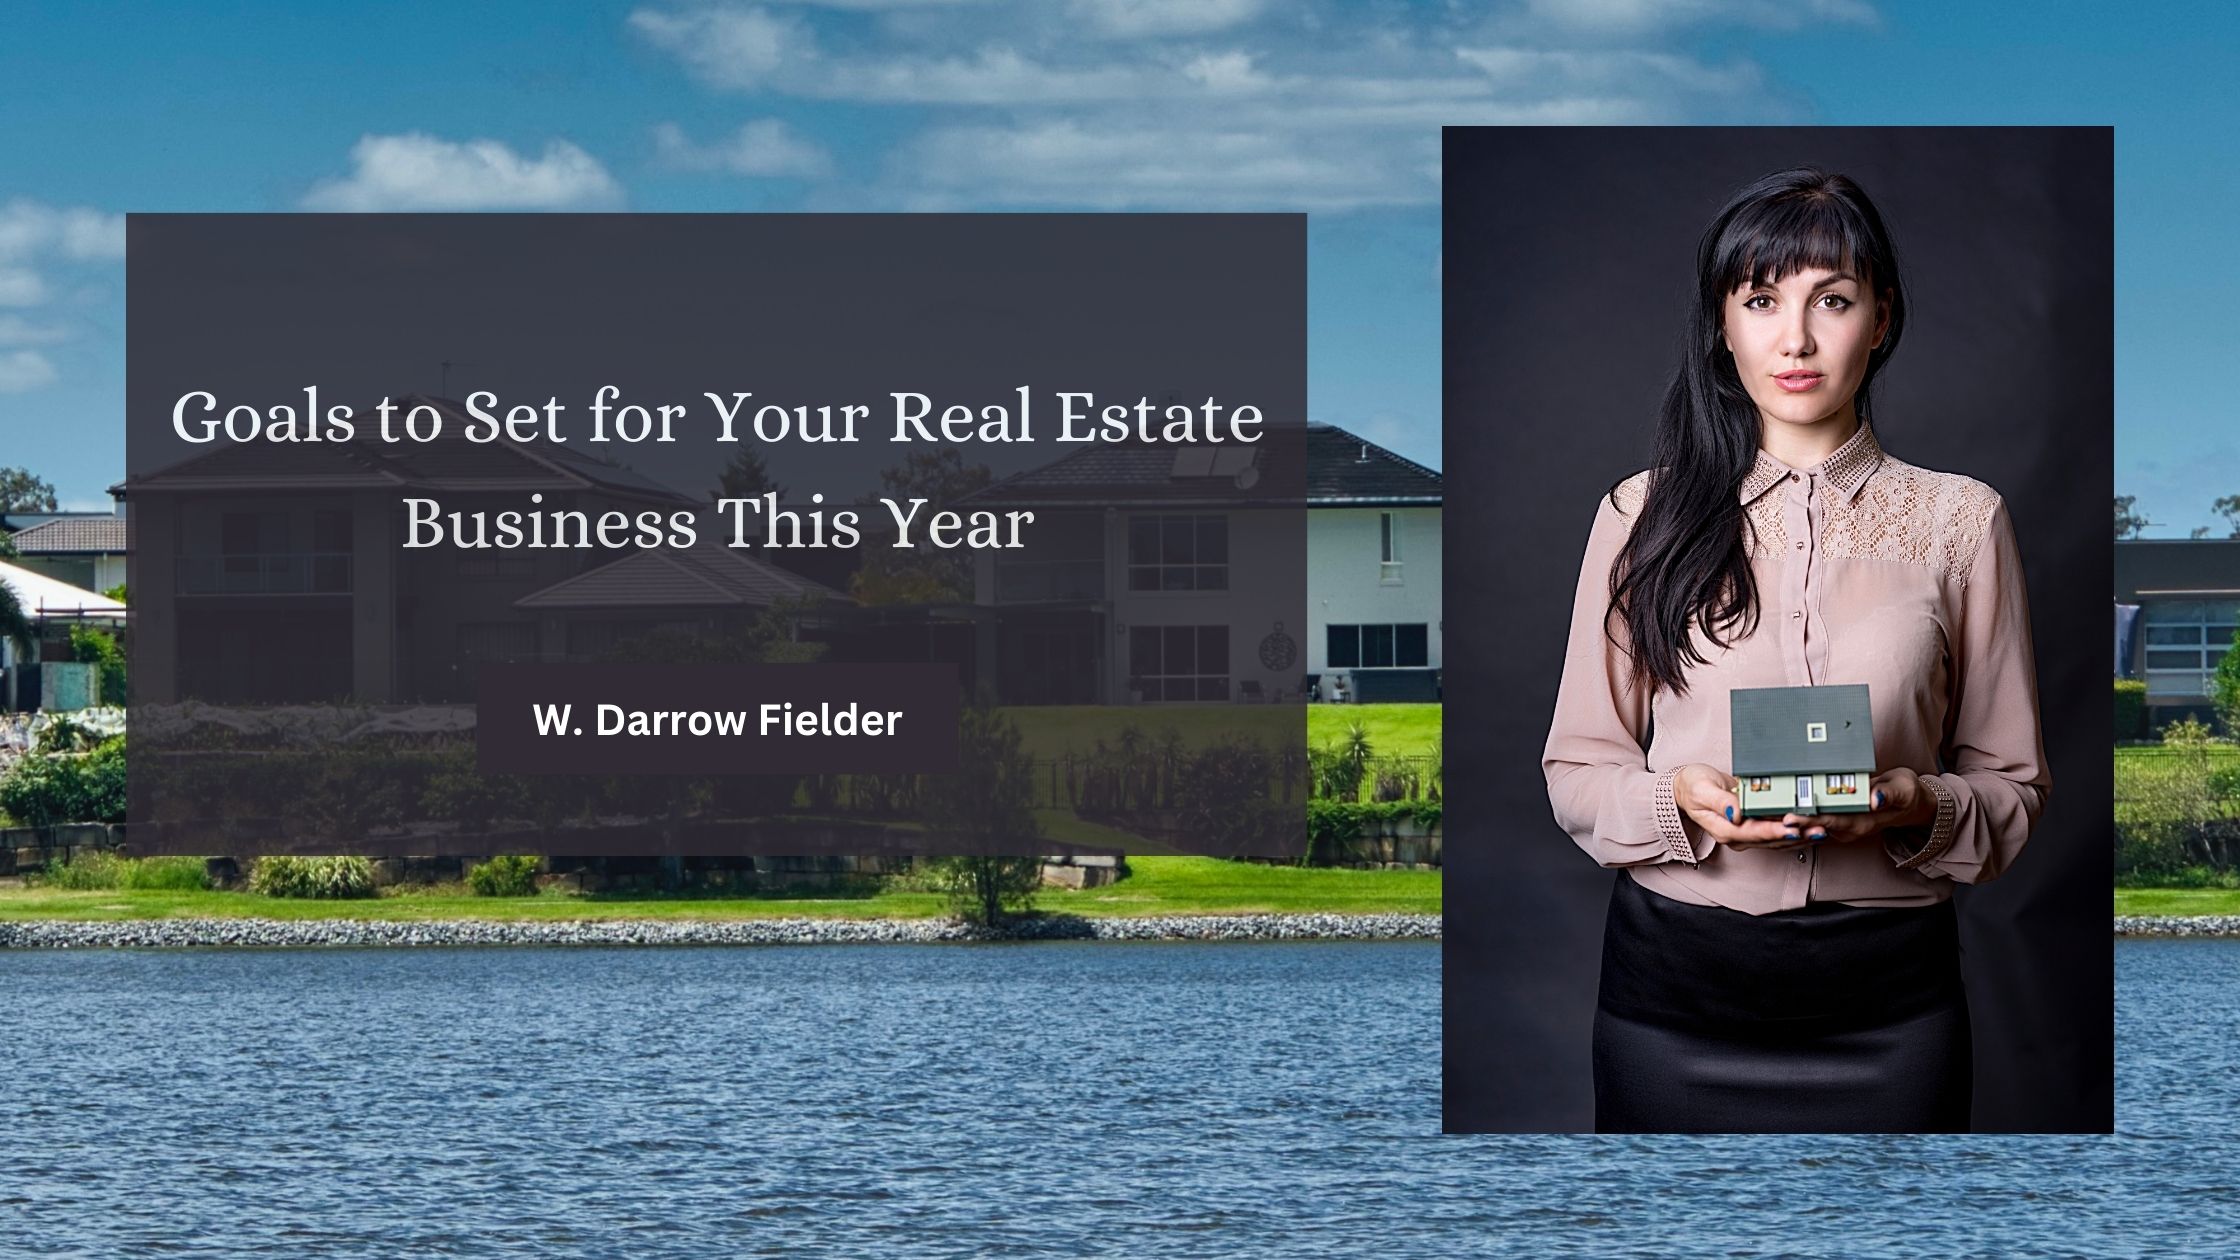 Goals to Set for Your Real Estate Business This Year